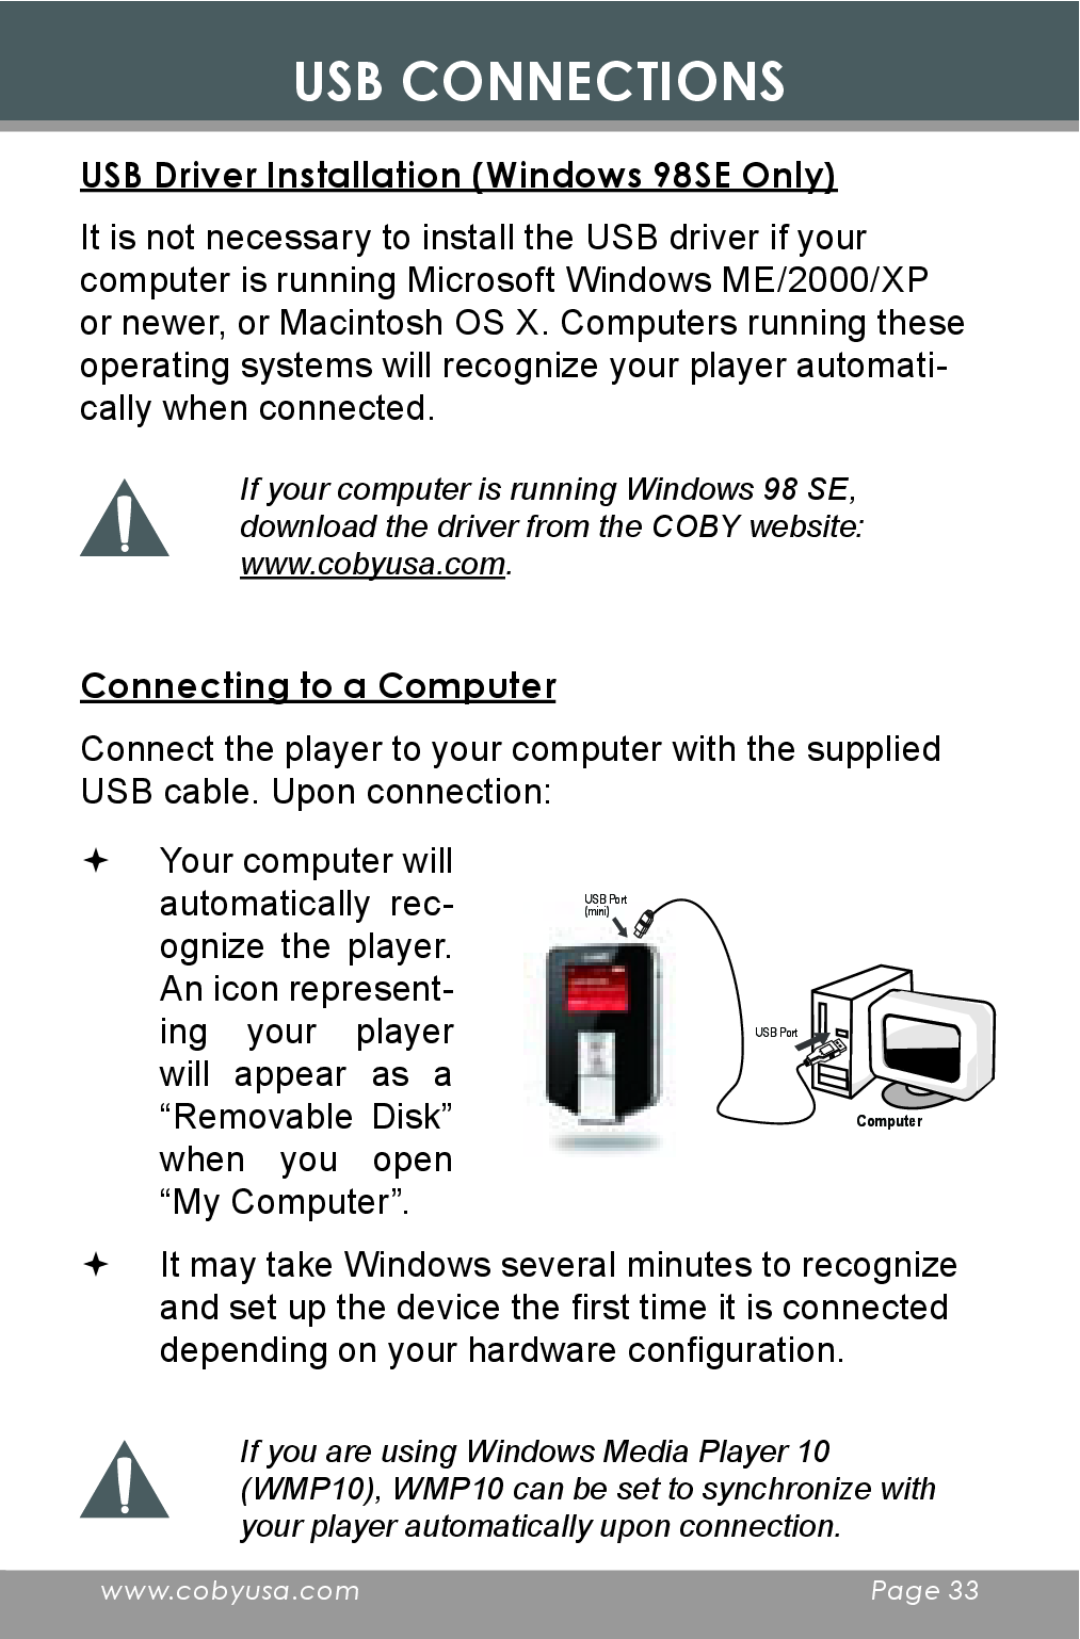 COBY electronic MP-C643 USB Driver Installation Windows 98SE Only, Connecting to a Computer, Usb Connections 